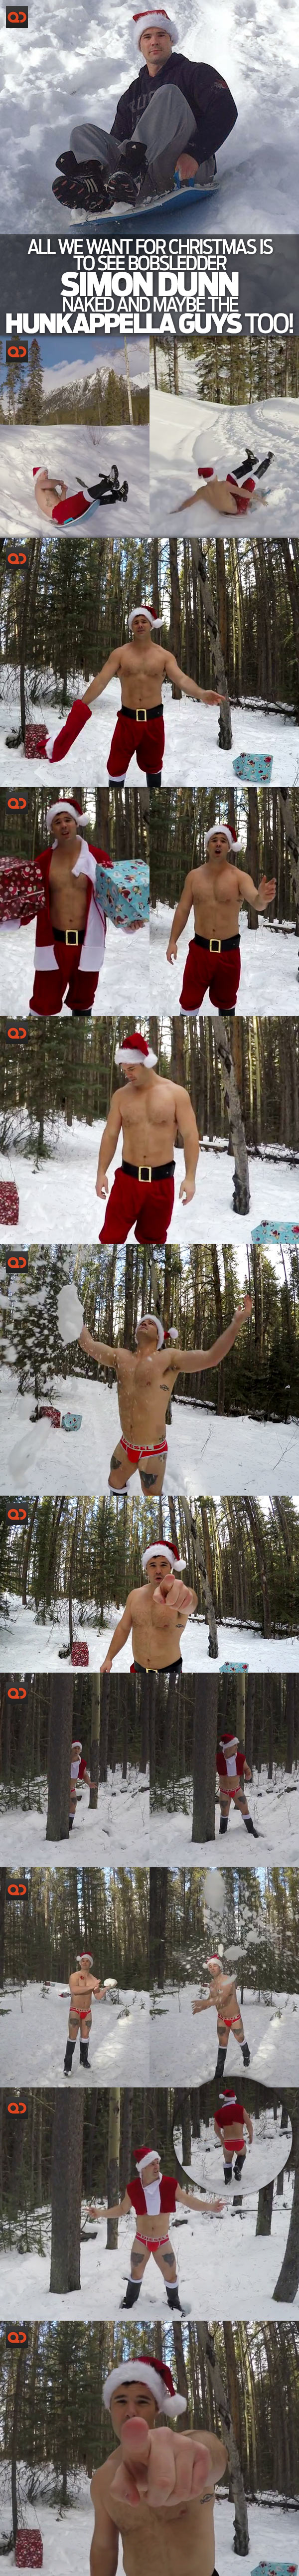 All We Want For Christmas Is To See Bobsledder Simon Dunn Naked… And Maybe The Hunkappella Guys Too!